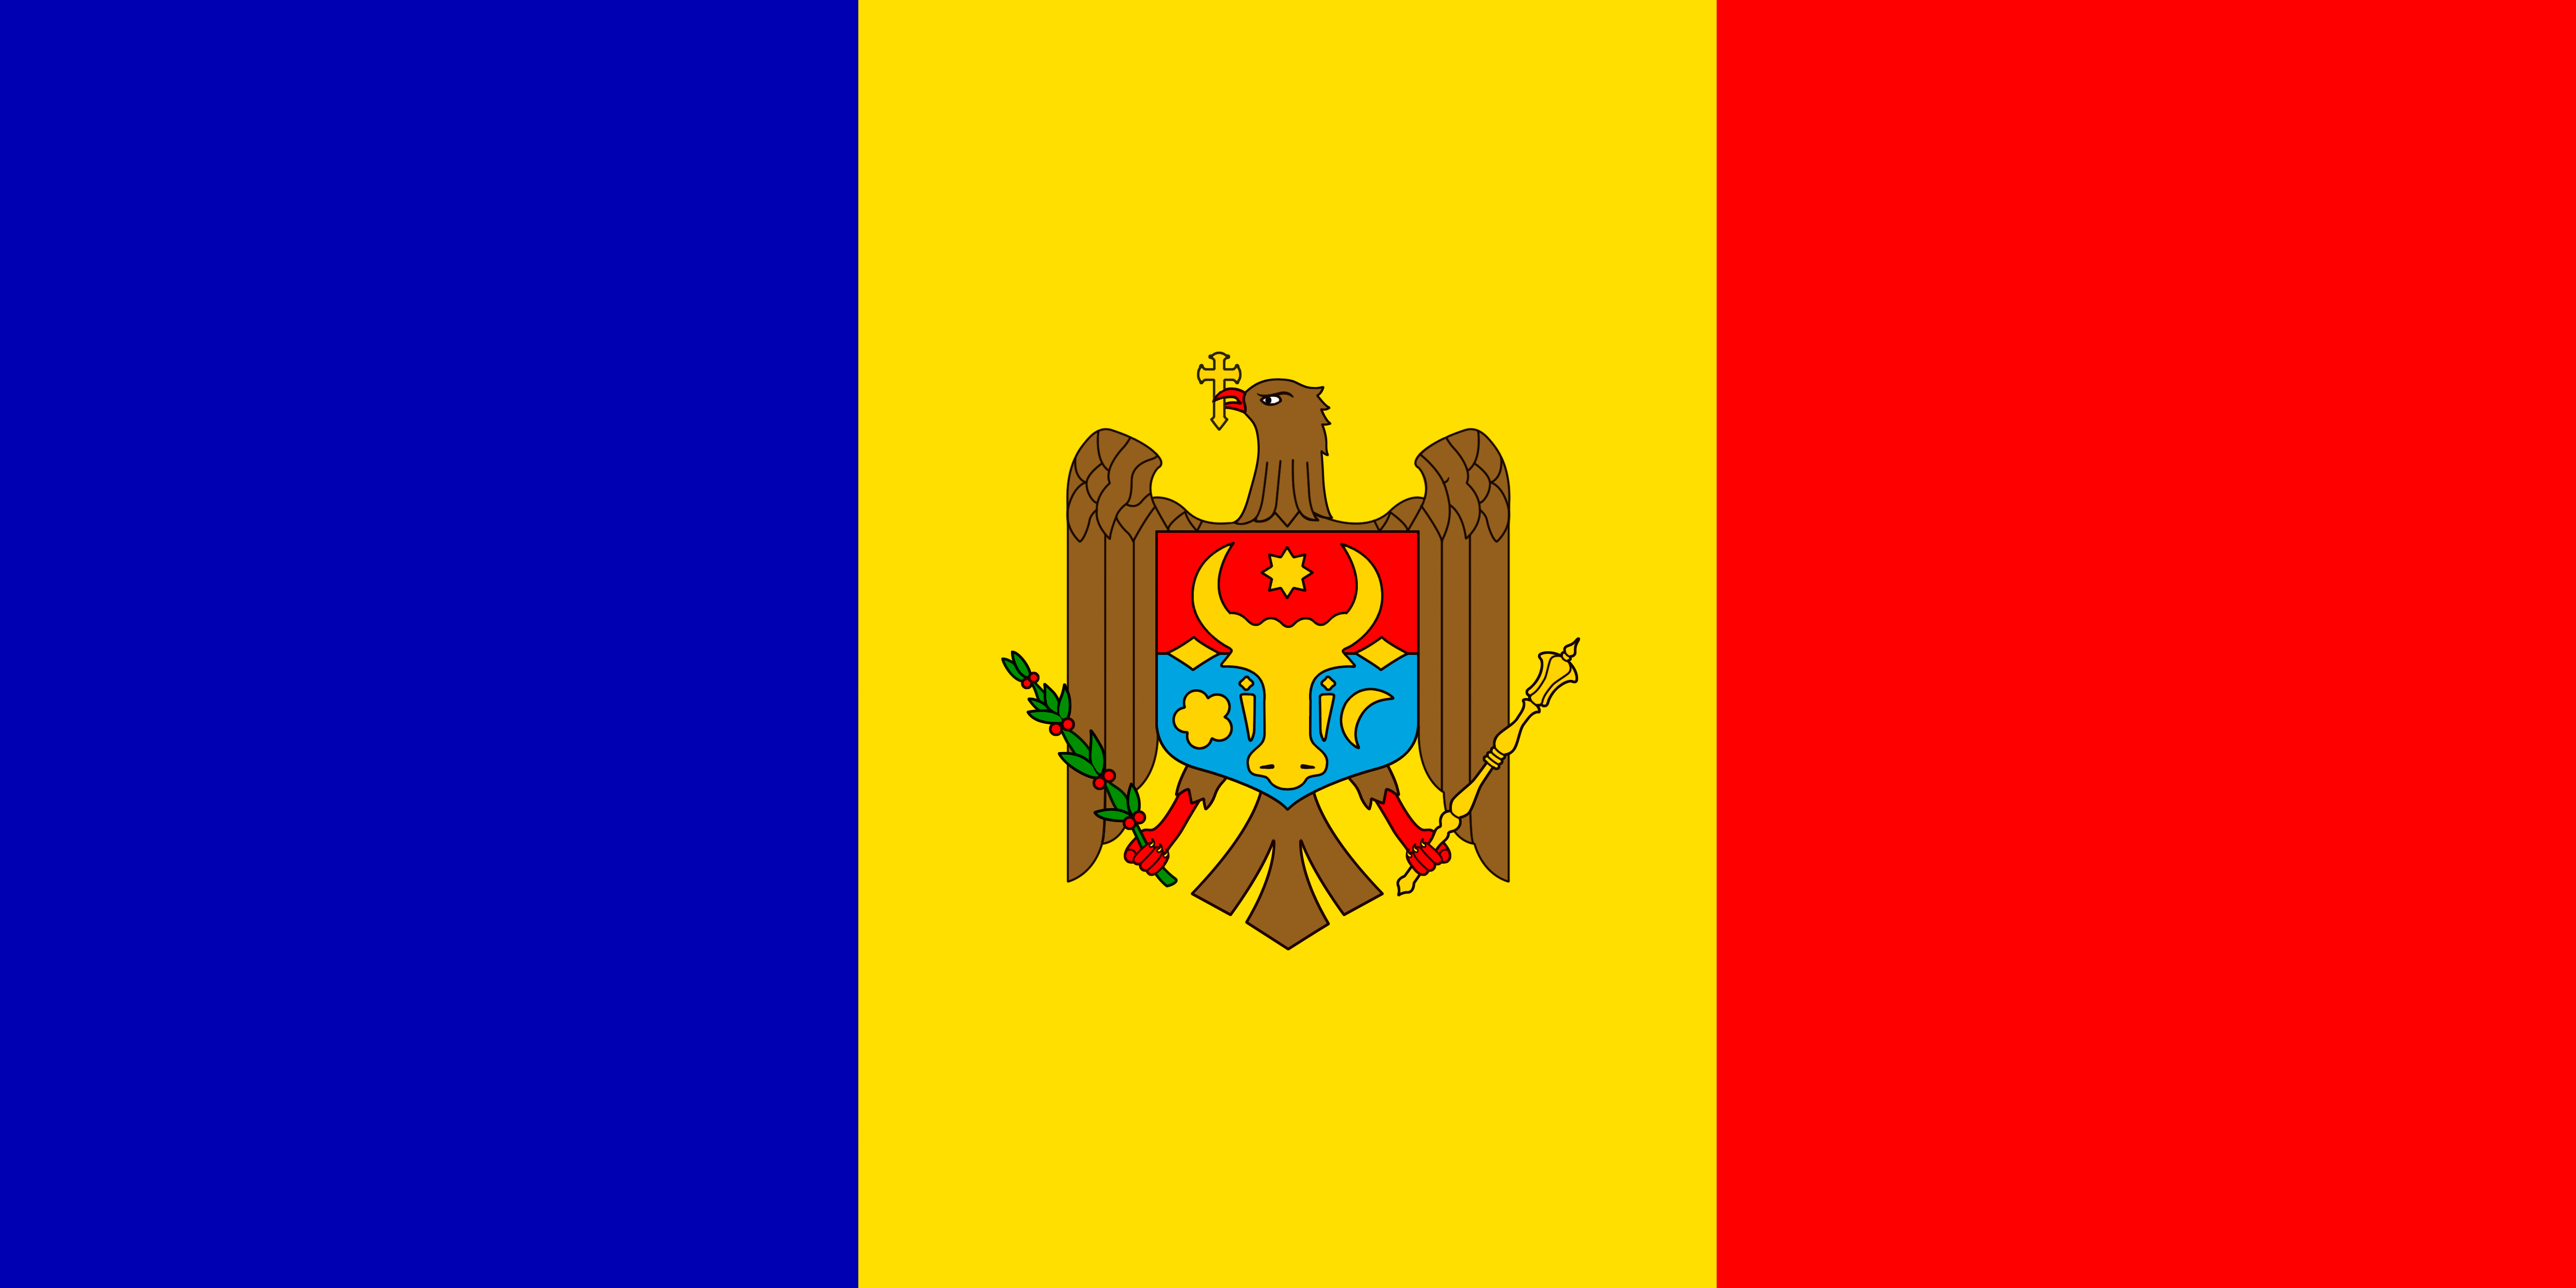 On January 15, 2016 within the framework of a visit to the Republic of Moldova the Director of the International Delphic Committee Vladimir  Ponyavin had a meeting with the Chairman of the National Delphic Council of the Republic of Moldova, the Secretary